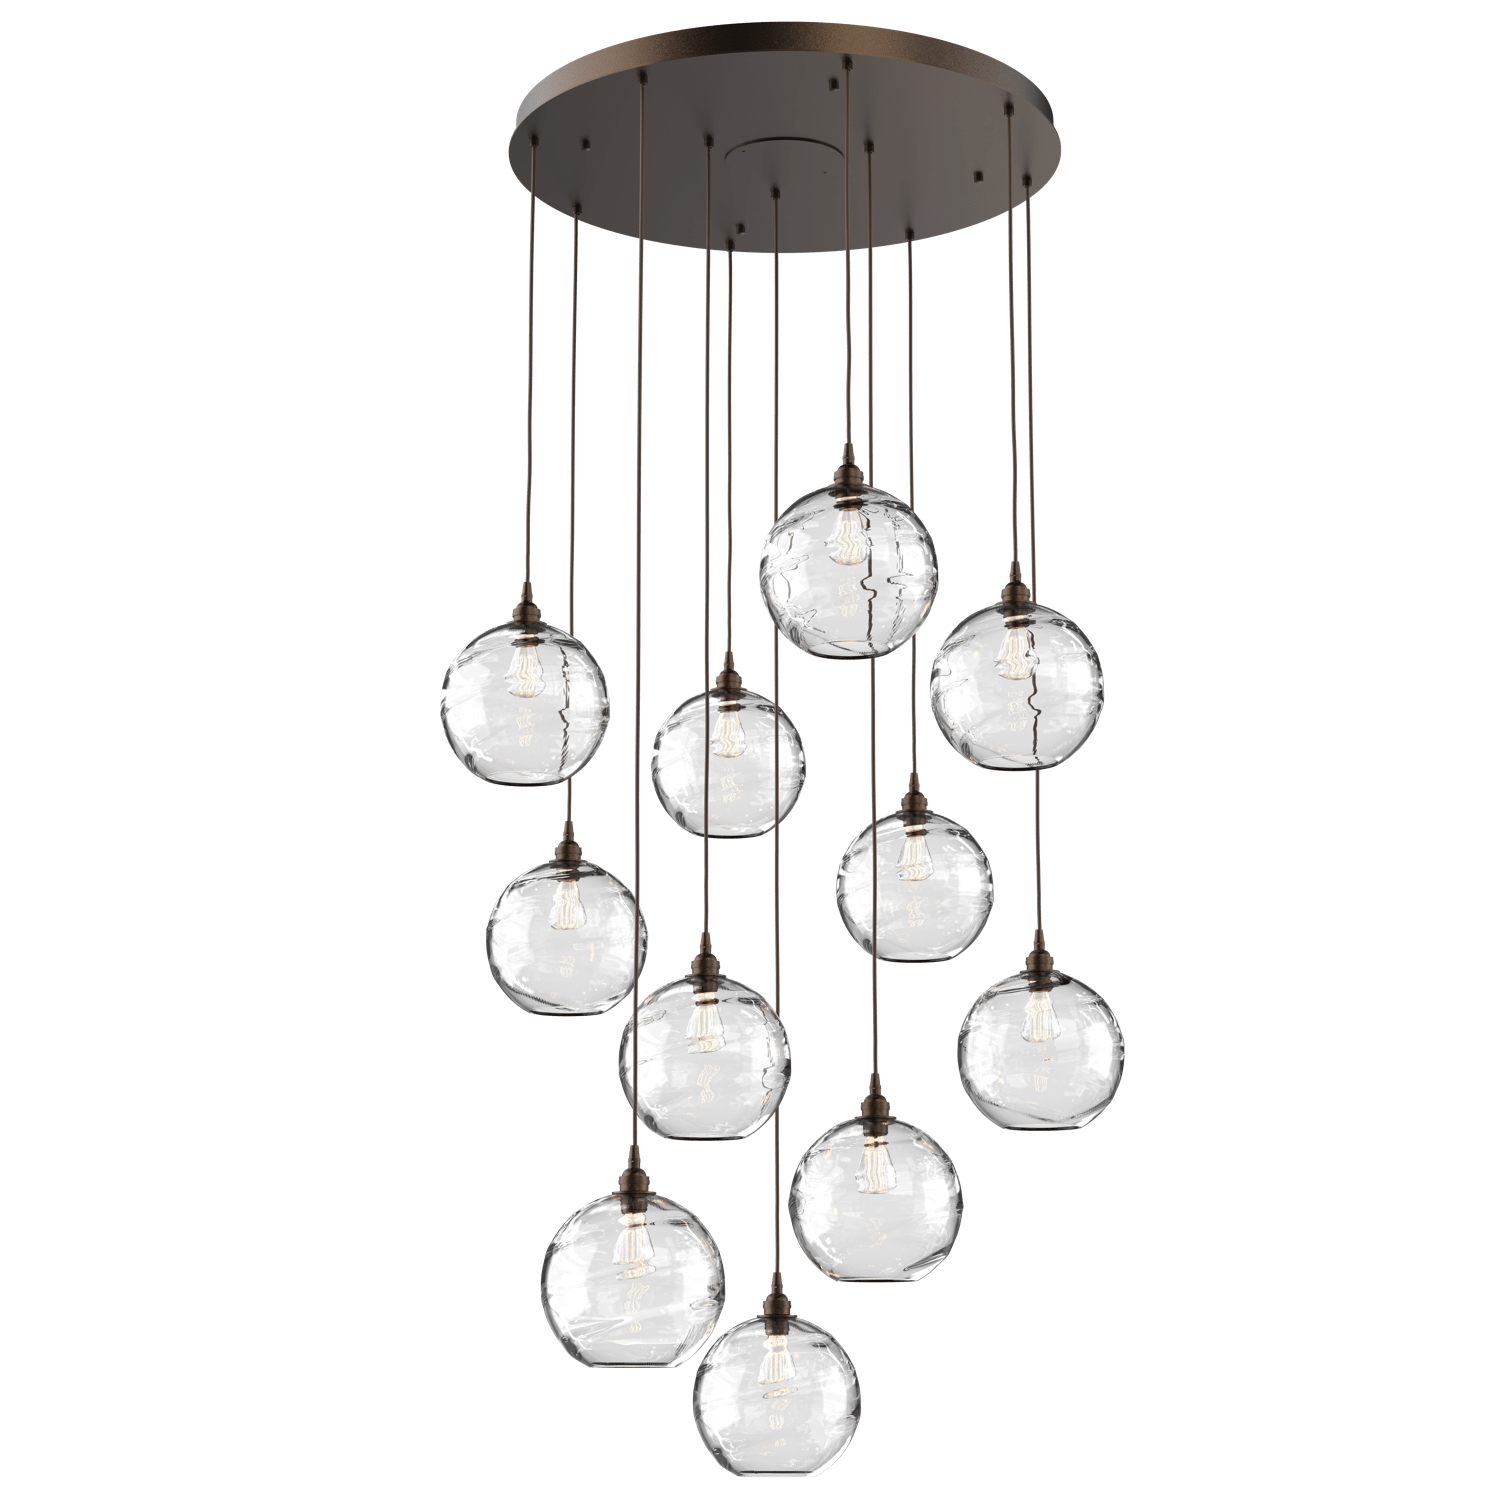 CHB0047-11-FB-OC-Hammerton-Studio-Optic-Blown-Glass-Terra-11-light-round-pendant-chandelier-with-flat-bronze-finish-and-optic-clear-blown-glass-shades-and-incandescent-lamping